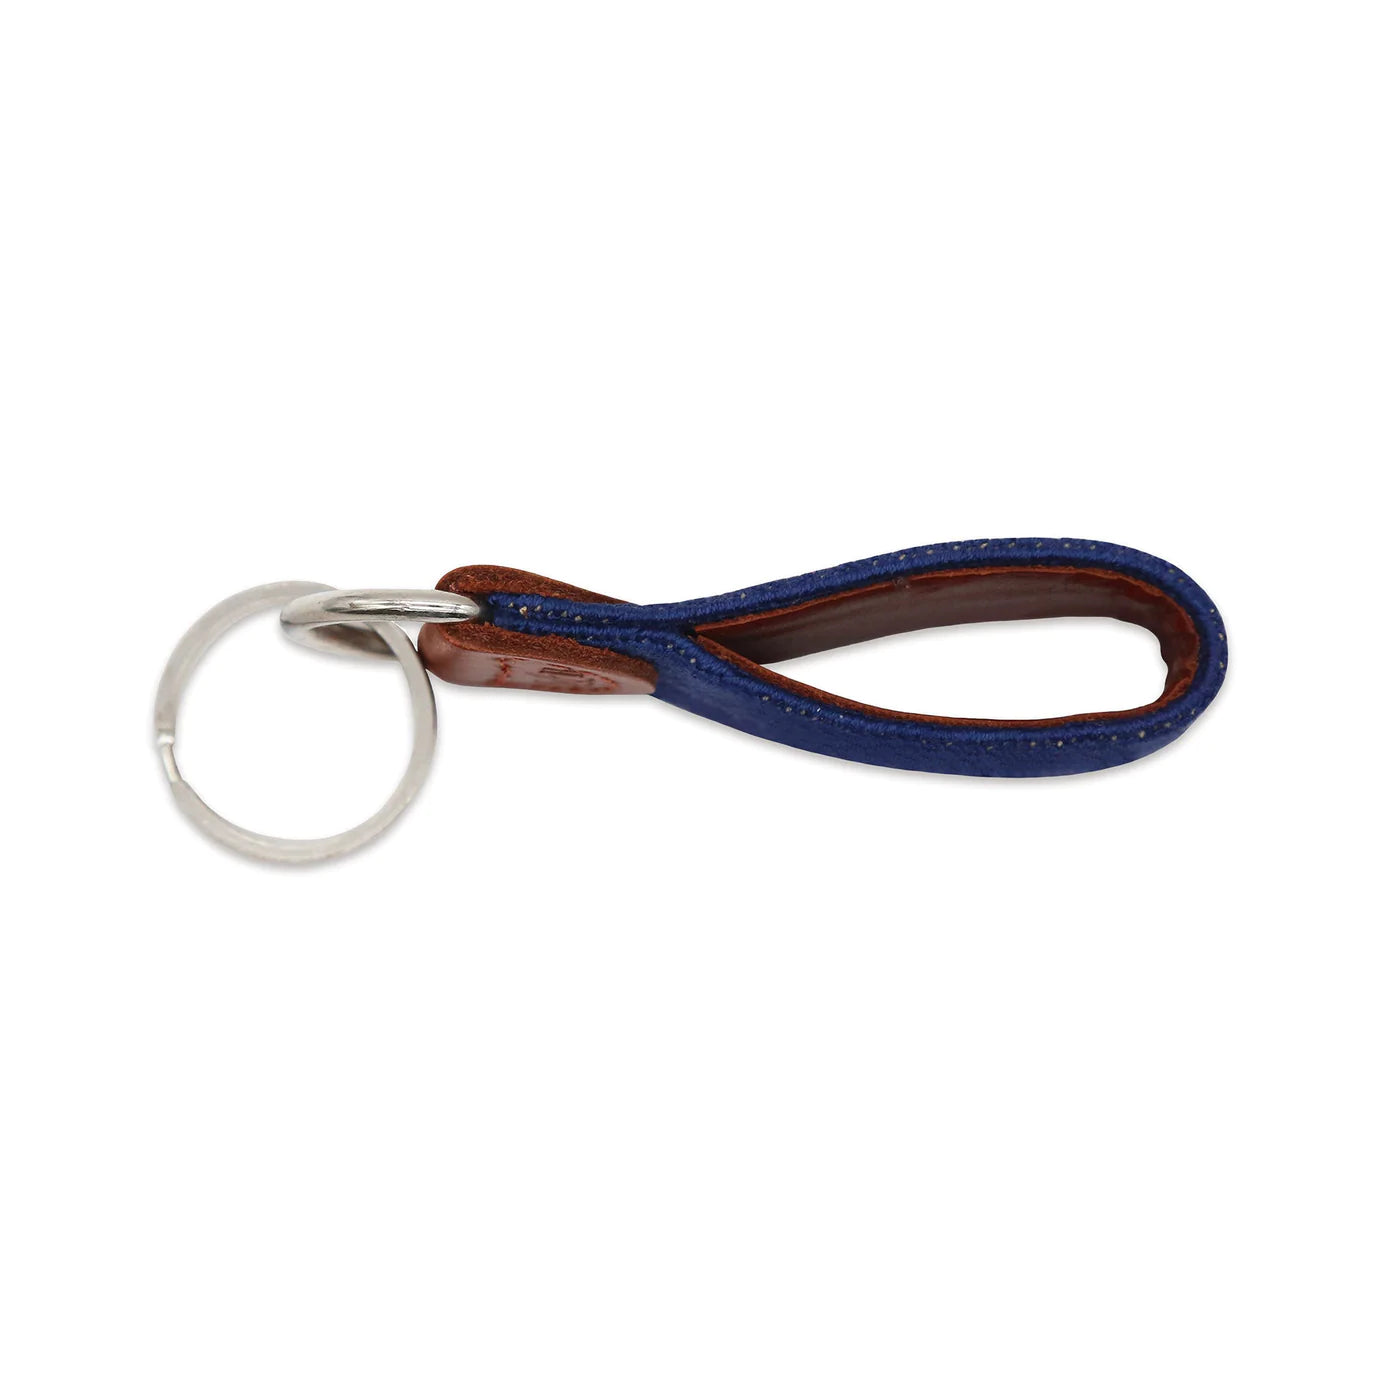 Needlepoint Key FOB - Collegiate - Side View